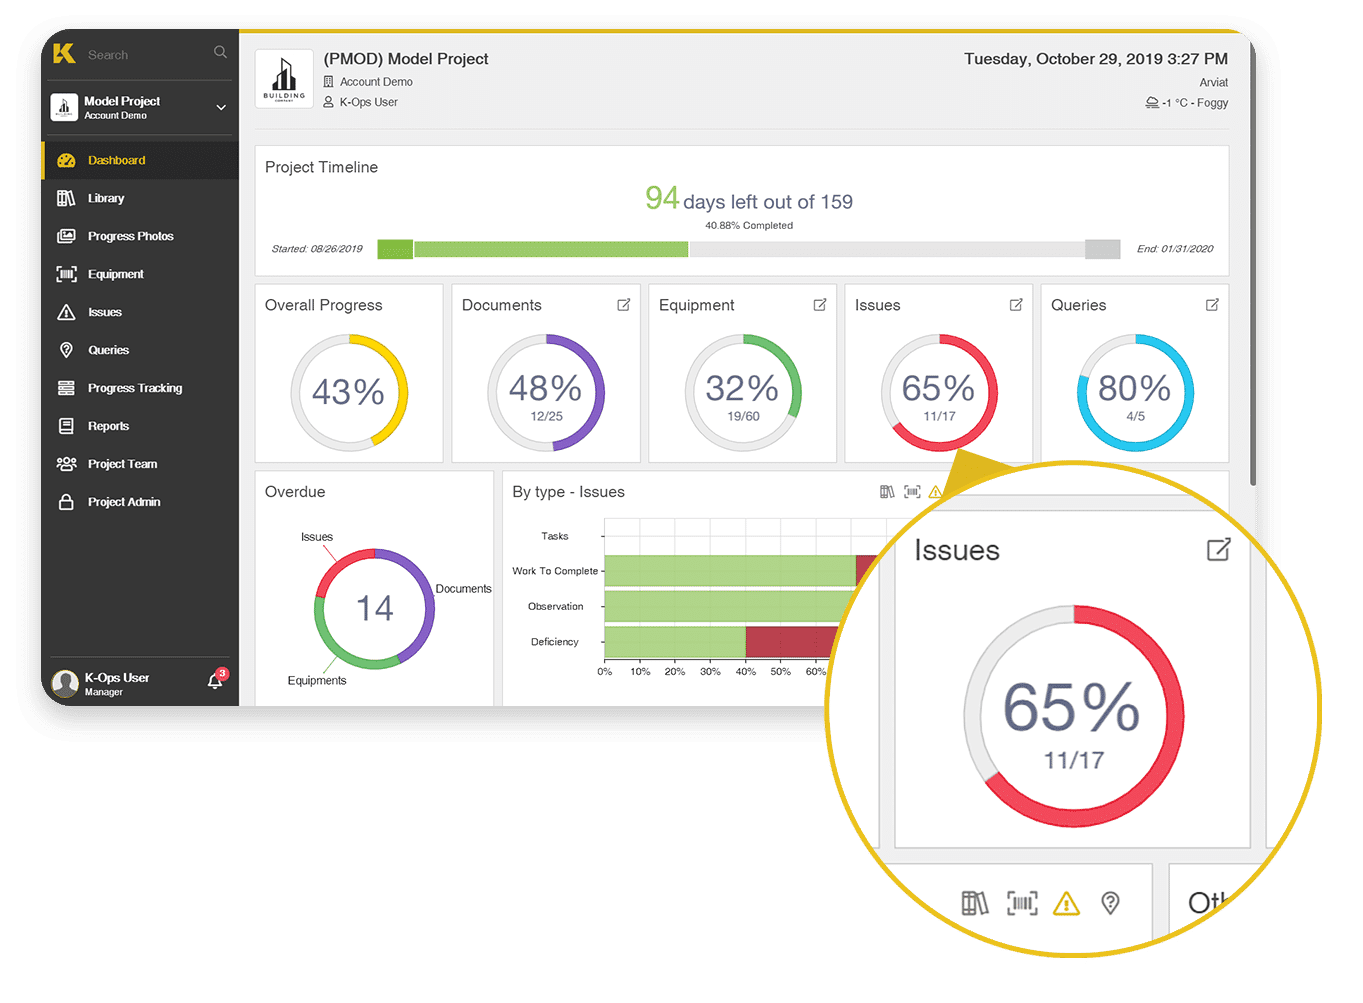 Visibility in K-Ops dashboard